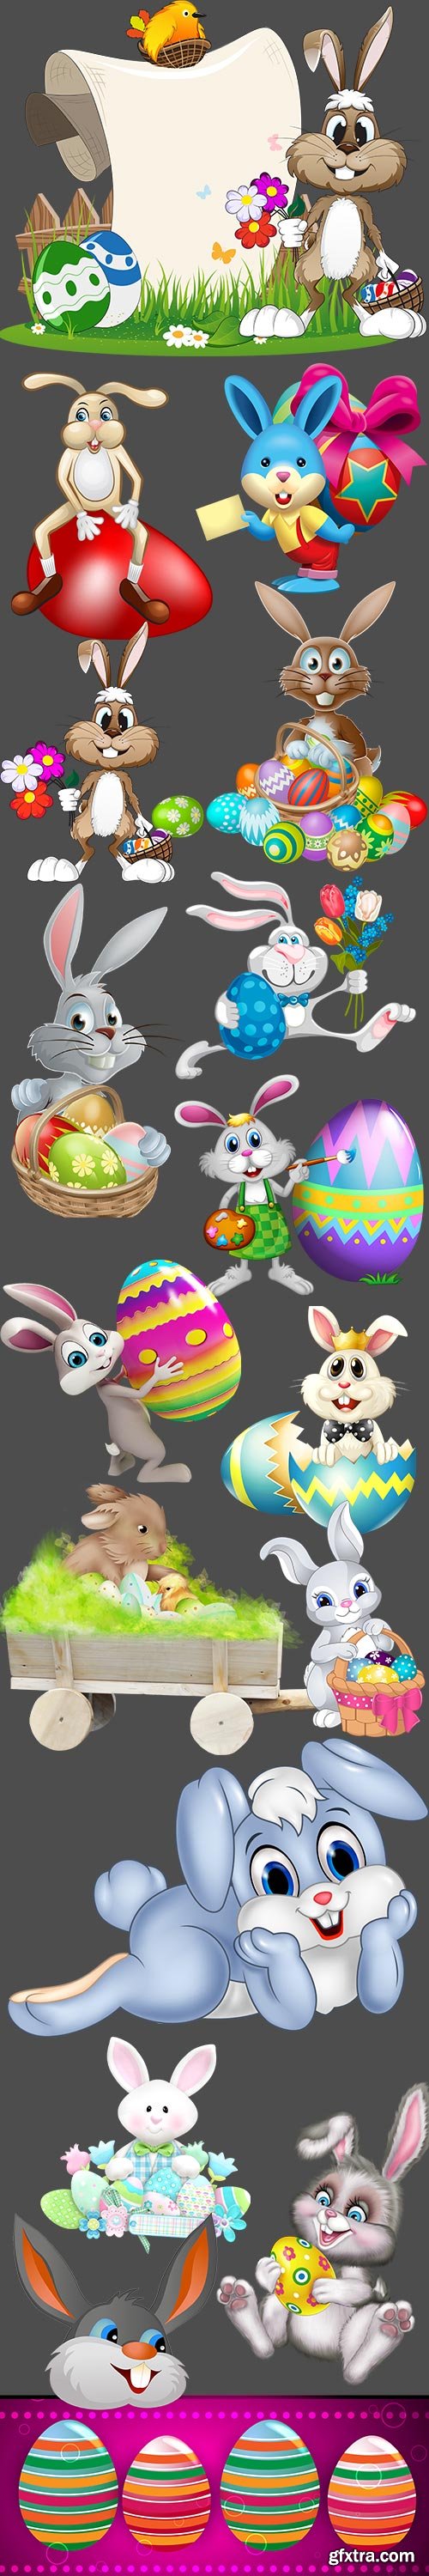 Easter Bunny clipart on a transparent background